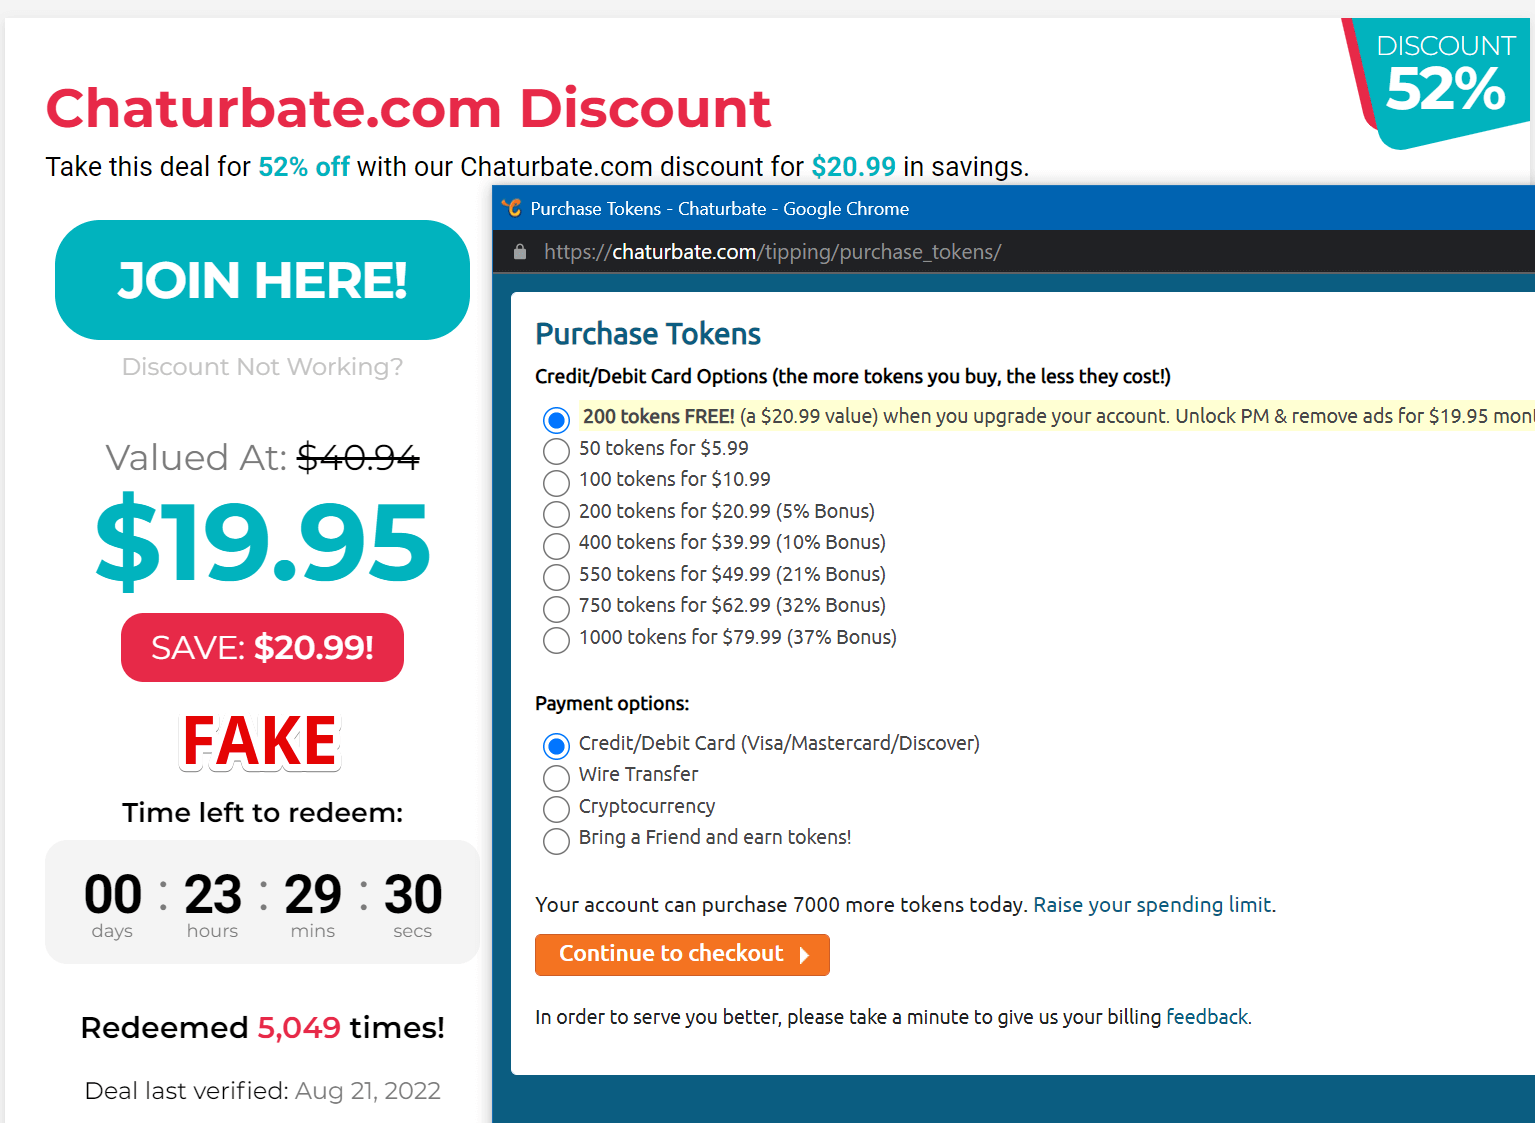 Example of the fake promotion